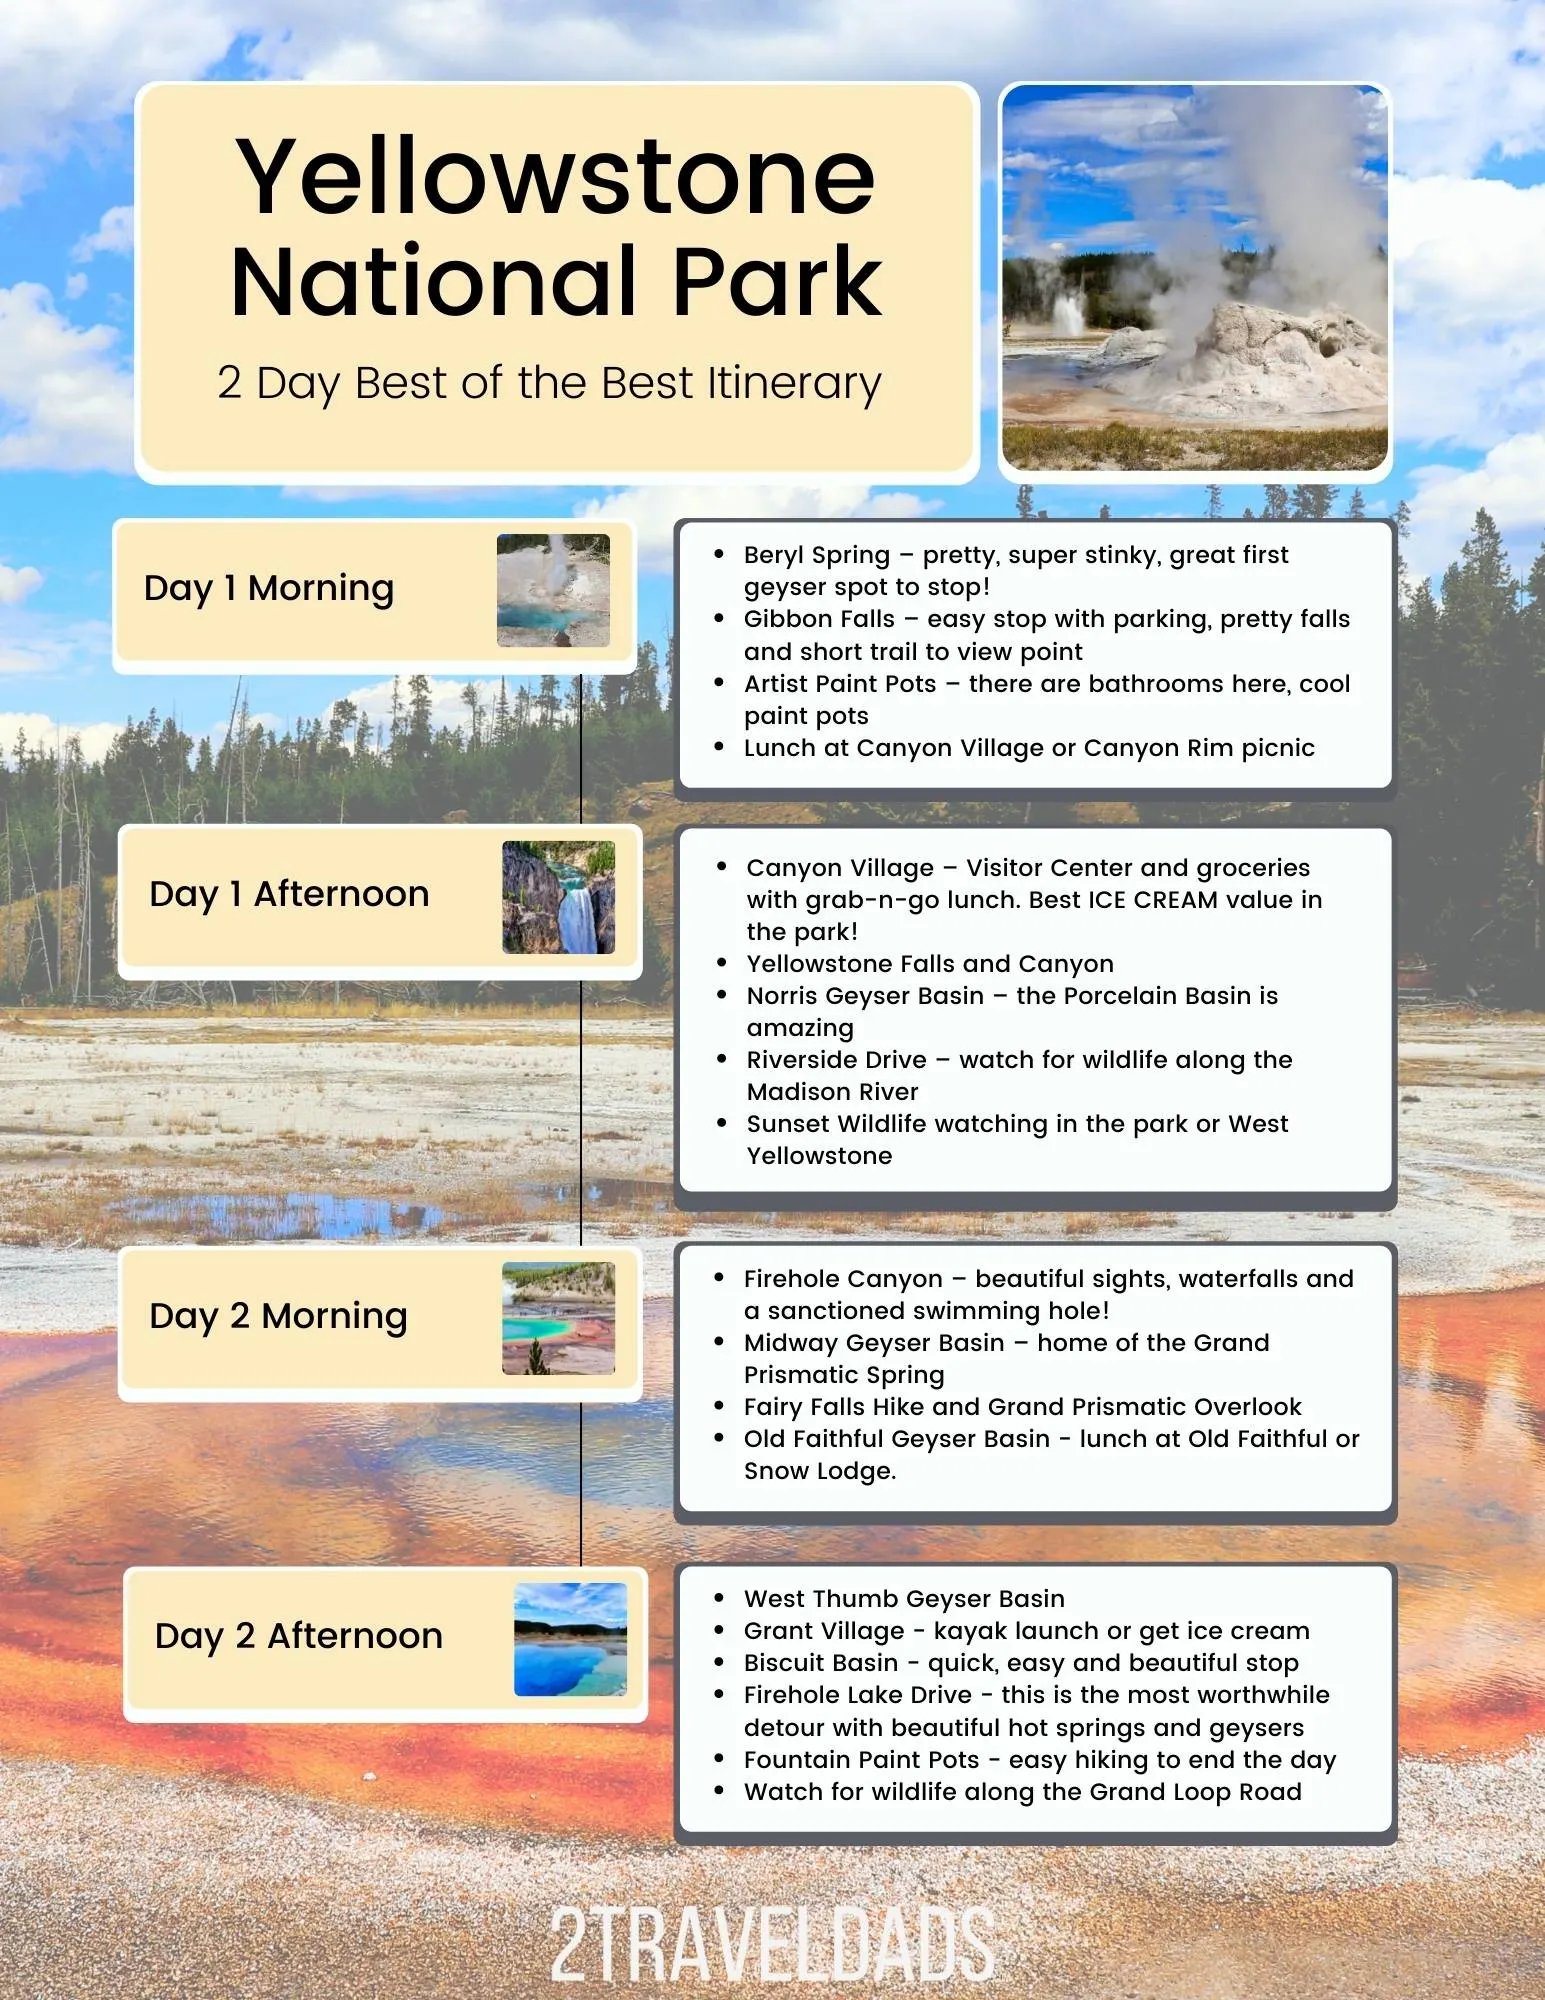 2 Day Yellowstone National Park Itinerary, the best of the best geysers and epic sights you can't miss.